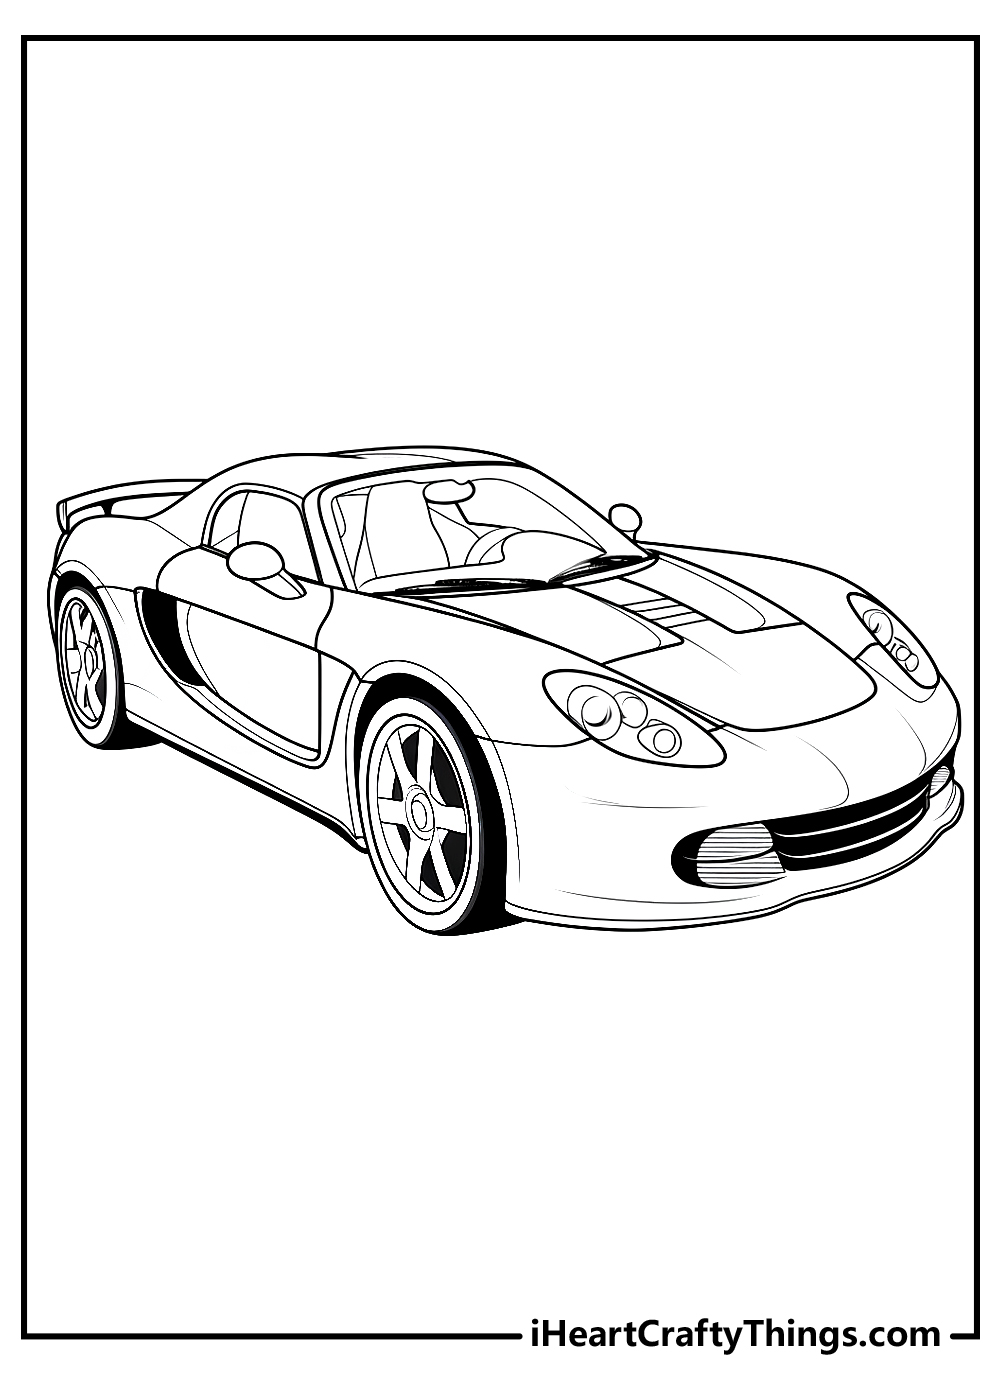 black-and-white sports car coloring pages